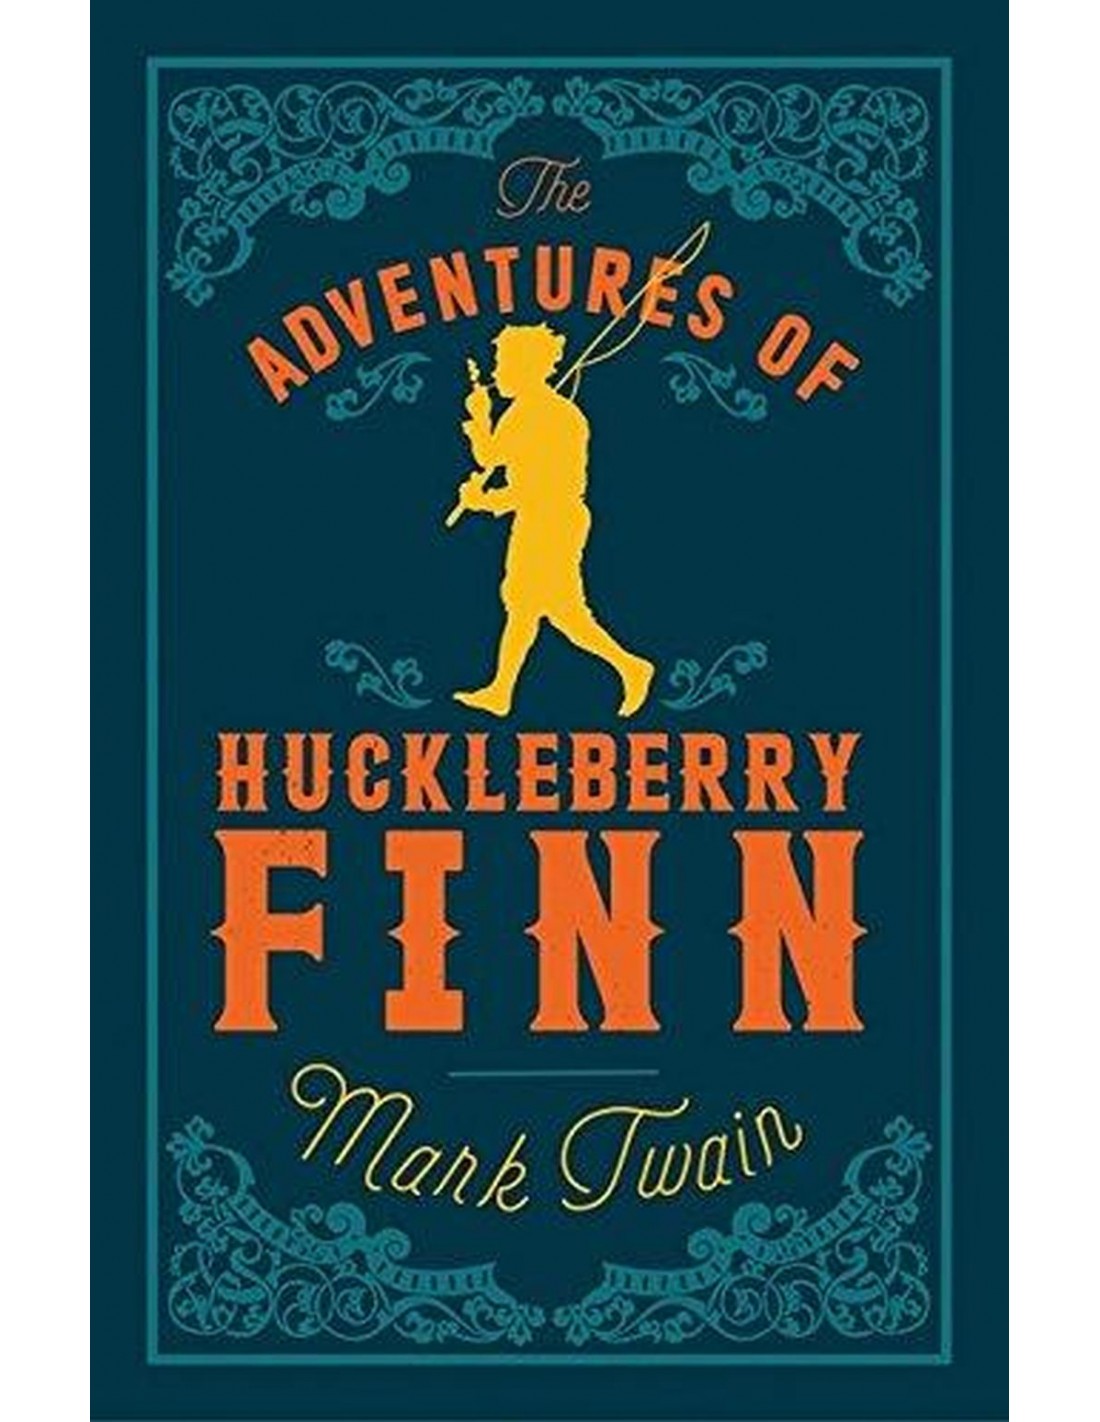 The Adventures of Huckleberry Finn download the new version for ios